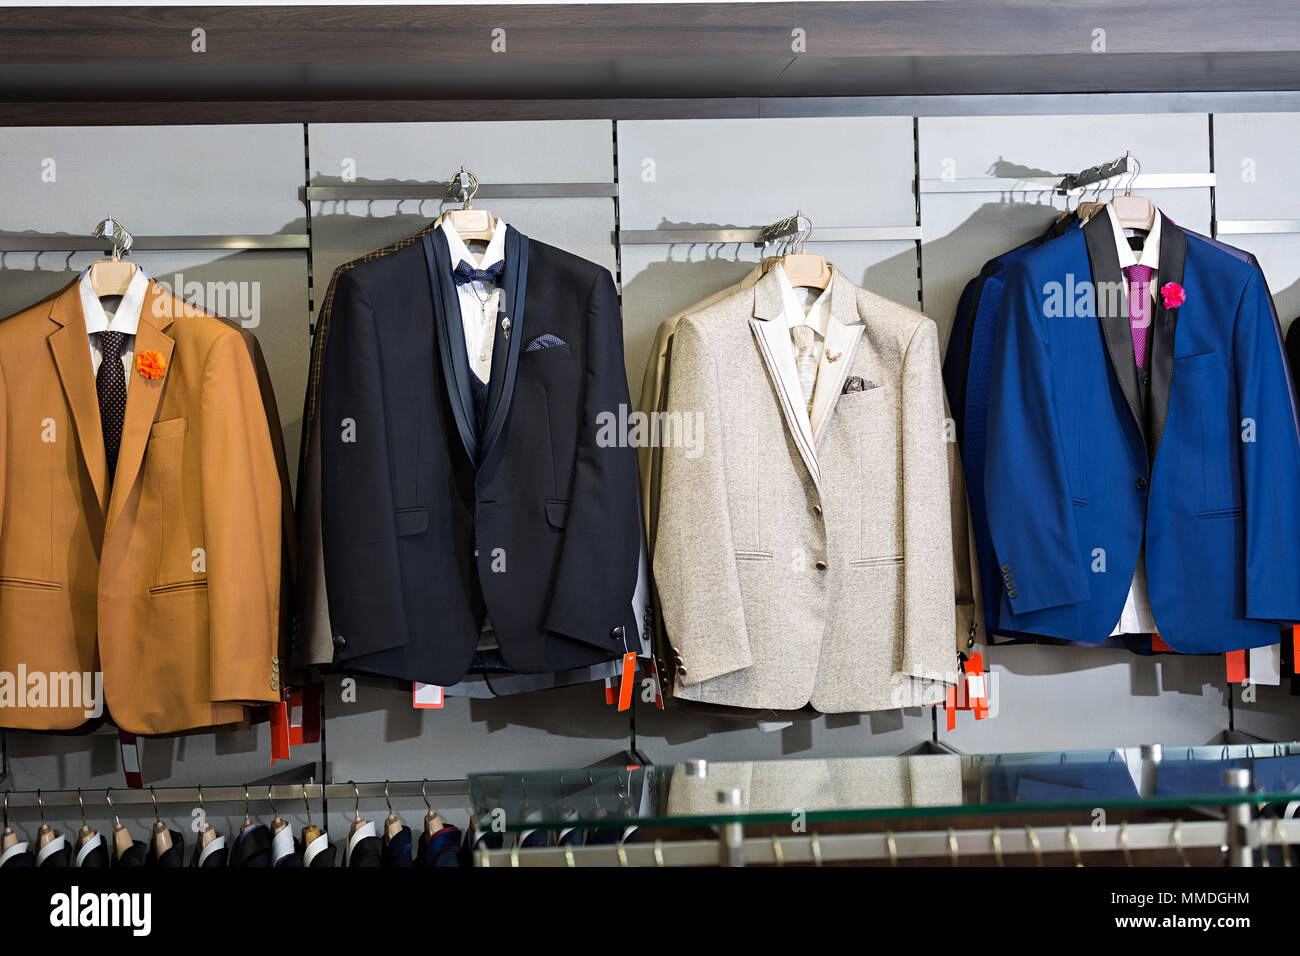 Clothes shop. expensive suits And coats hang in Shop Showroom Stock ...